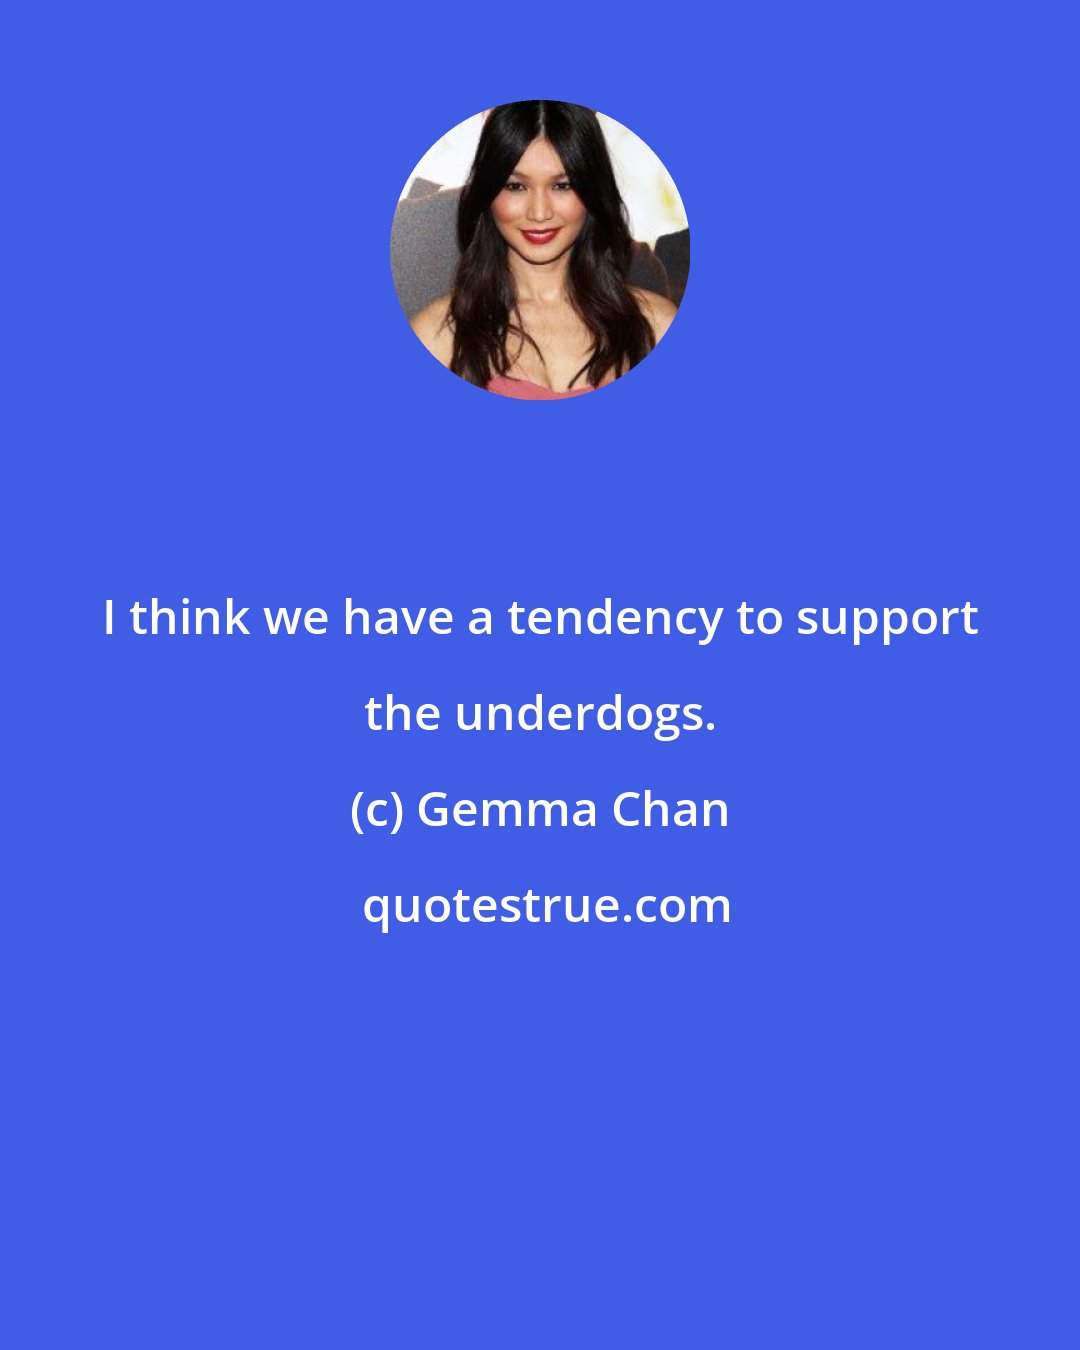 Gemma Chan: I think we have a tendency to support the underdogs.